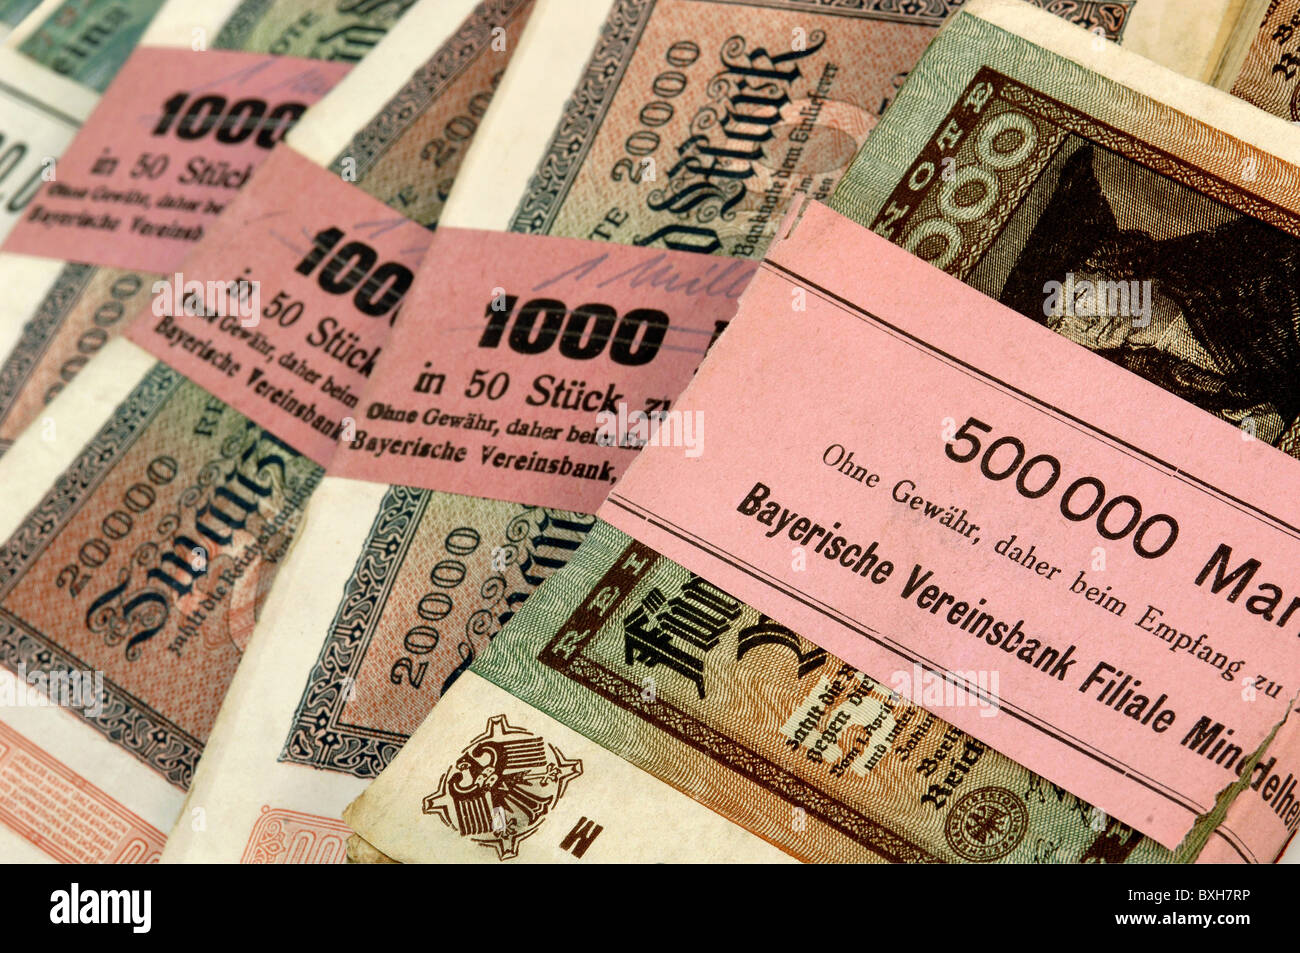 money / finance,bank notes,Germany,inflation money,December 1922 until February 1923,historic,historical,1920s,20s,20th century,numismatics,pack,bunch,revenue stamp,revenue stamps,banderole,Bavarian Vereinsbank,Reichsbank,branch office Mindelheim,banknote,bank note,bill ,bank notes,bale,bail,to bunch,baling,bailing,bunching,baled,bailed,bunched,500000,hyper inflation,credit crunch,rag money,Mark,political economy,national economy,purchasing power,buying power,increase of purchasing power,economic situation,economic flu,Additional-Rights-Clearences-Not Available Stock Photo